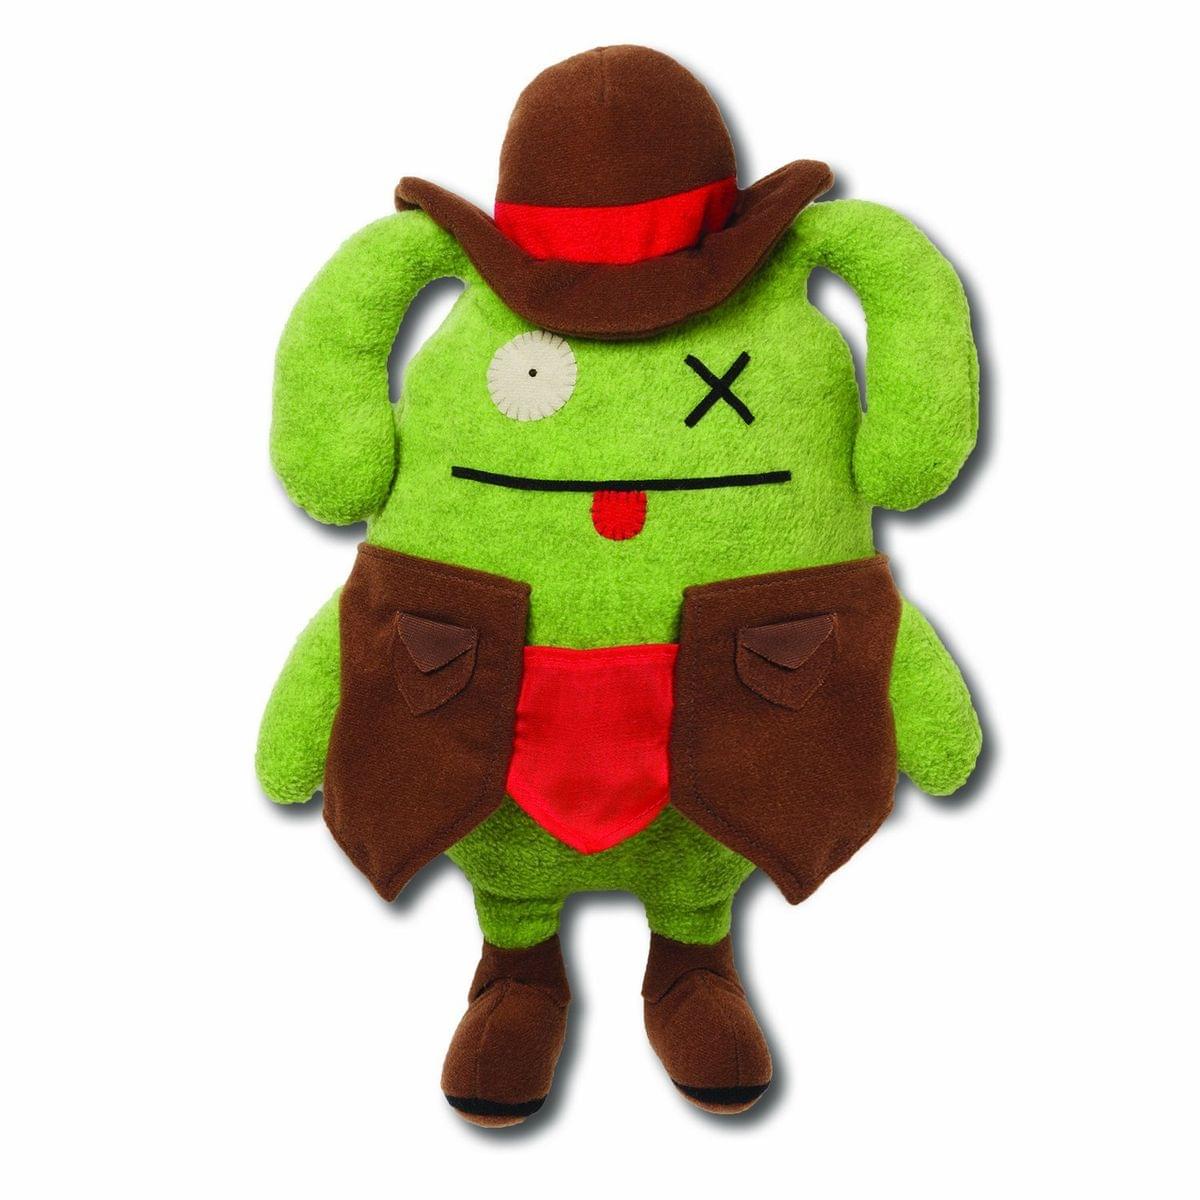 Ugly Dolls Comic Book Series 11" Plush: Wild West Ox